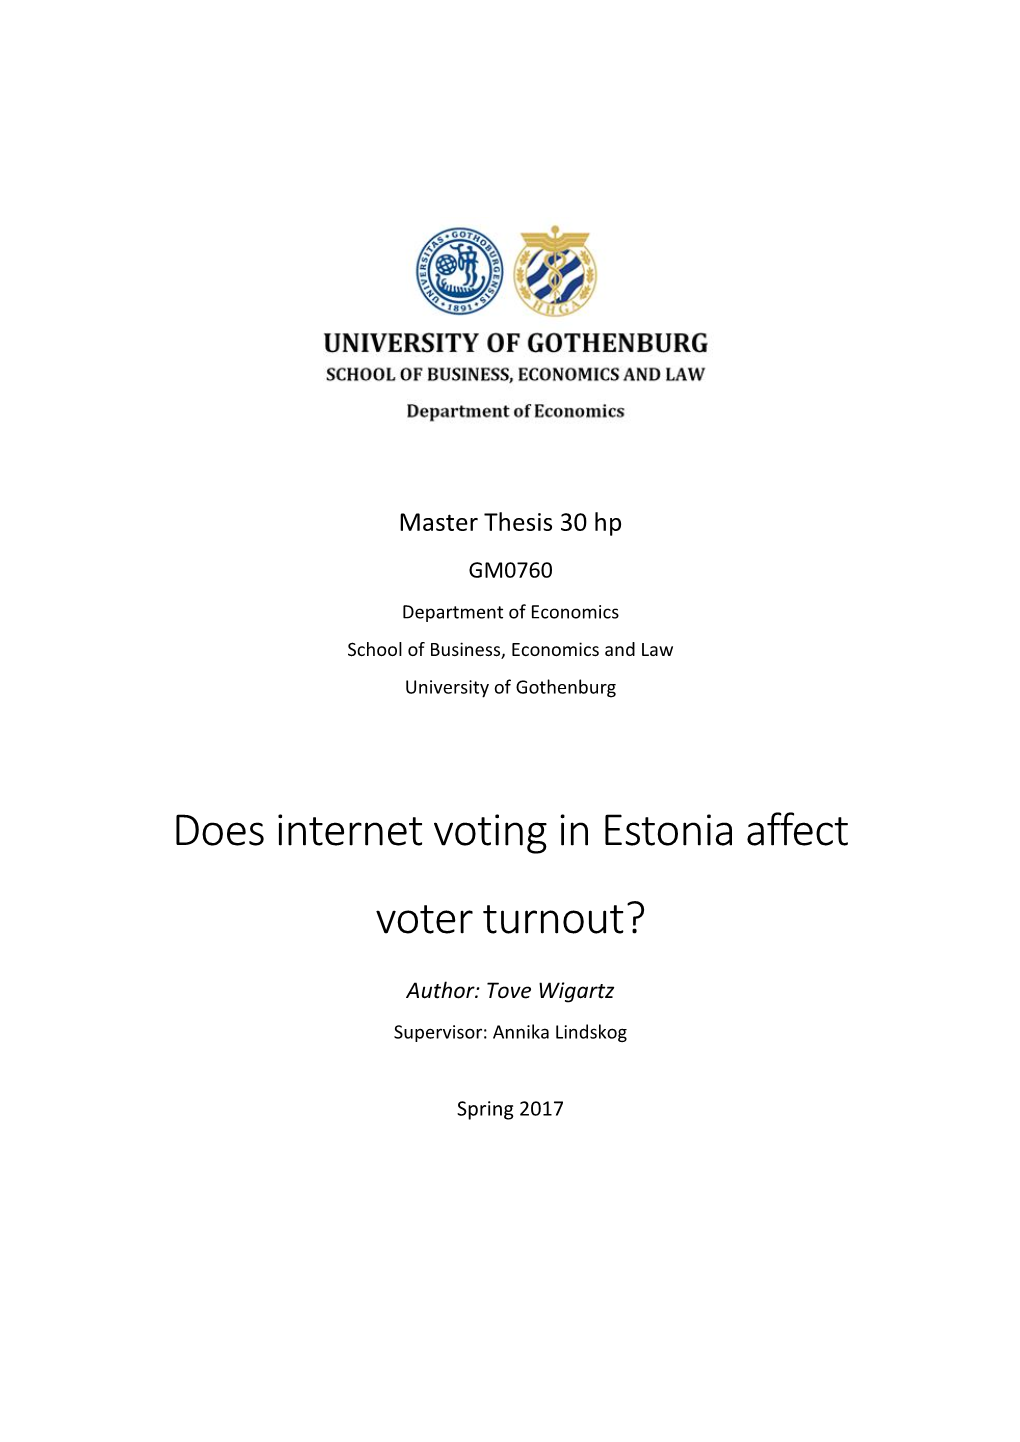 Does Internet Voting in Estonia Affect Voter Turnout?